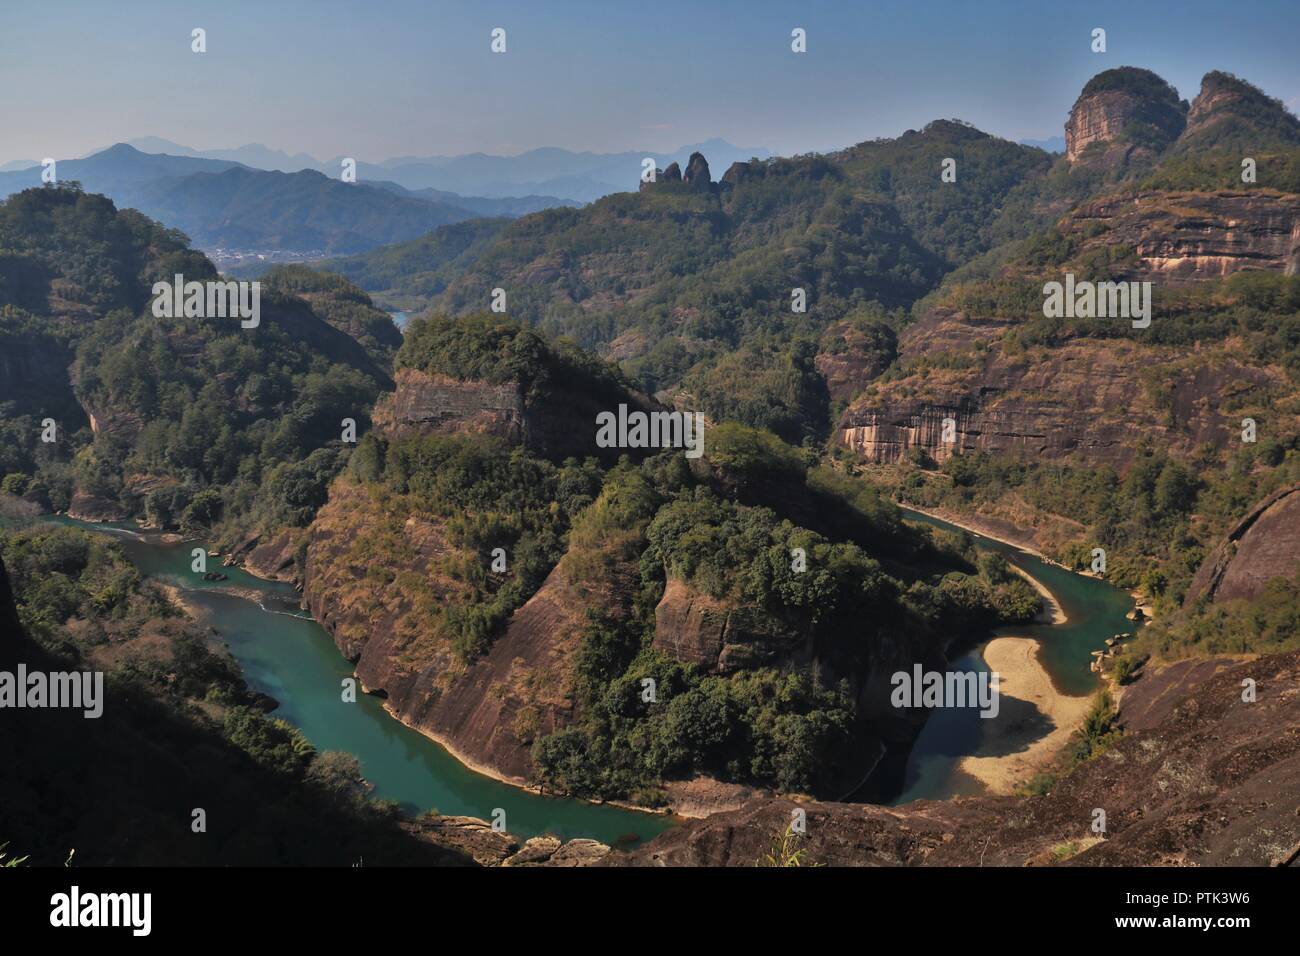 Beautiful scenery in China after a hiking trip. Stock Photo